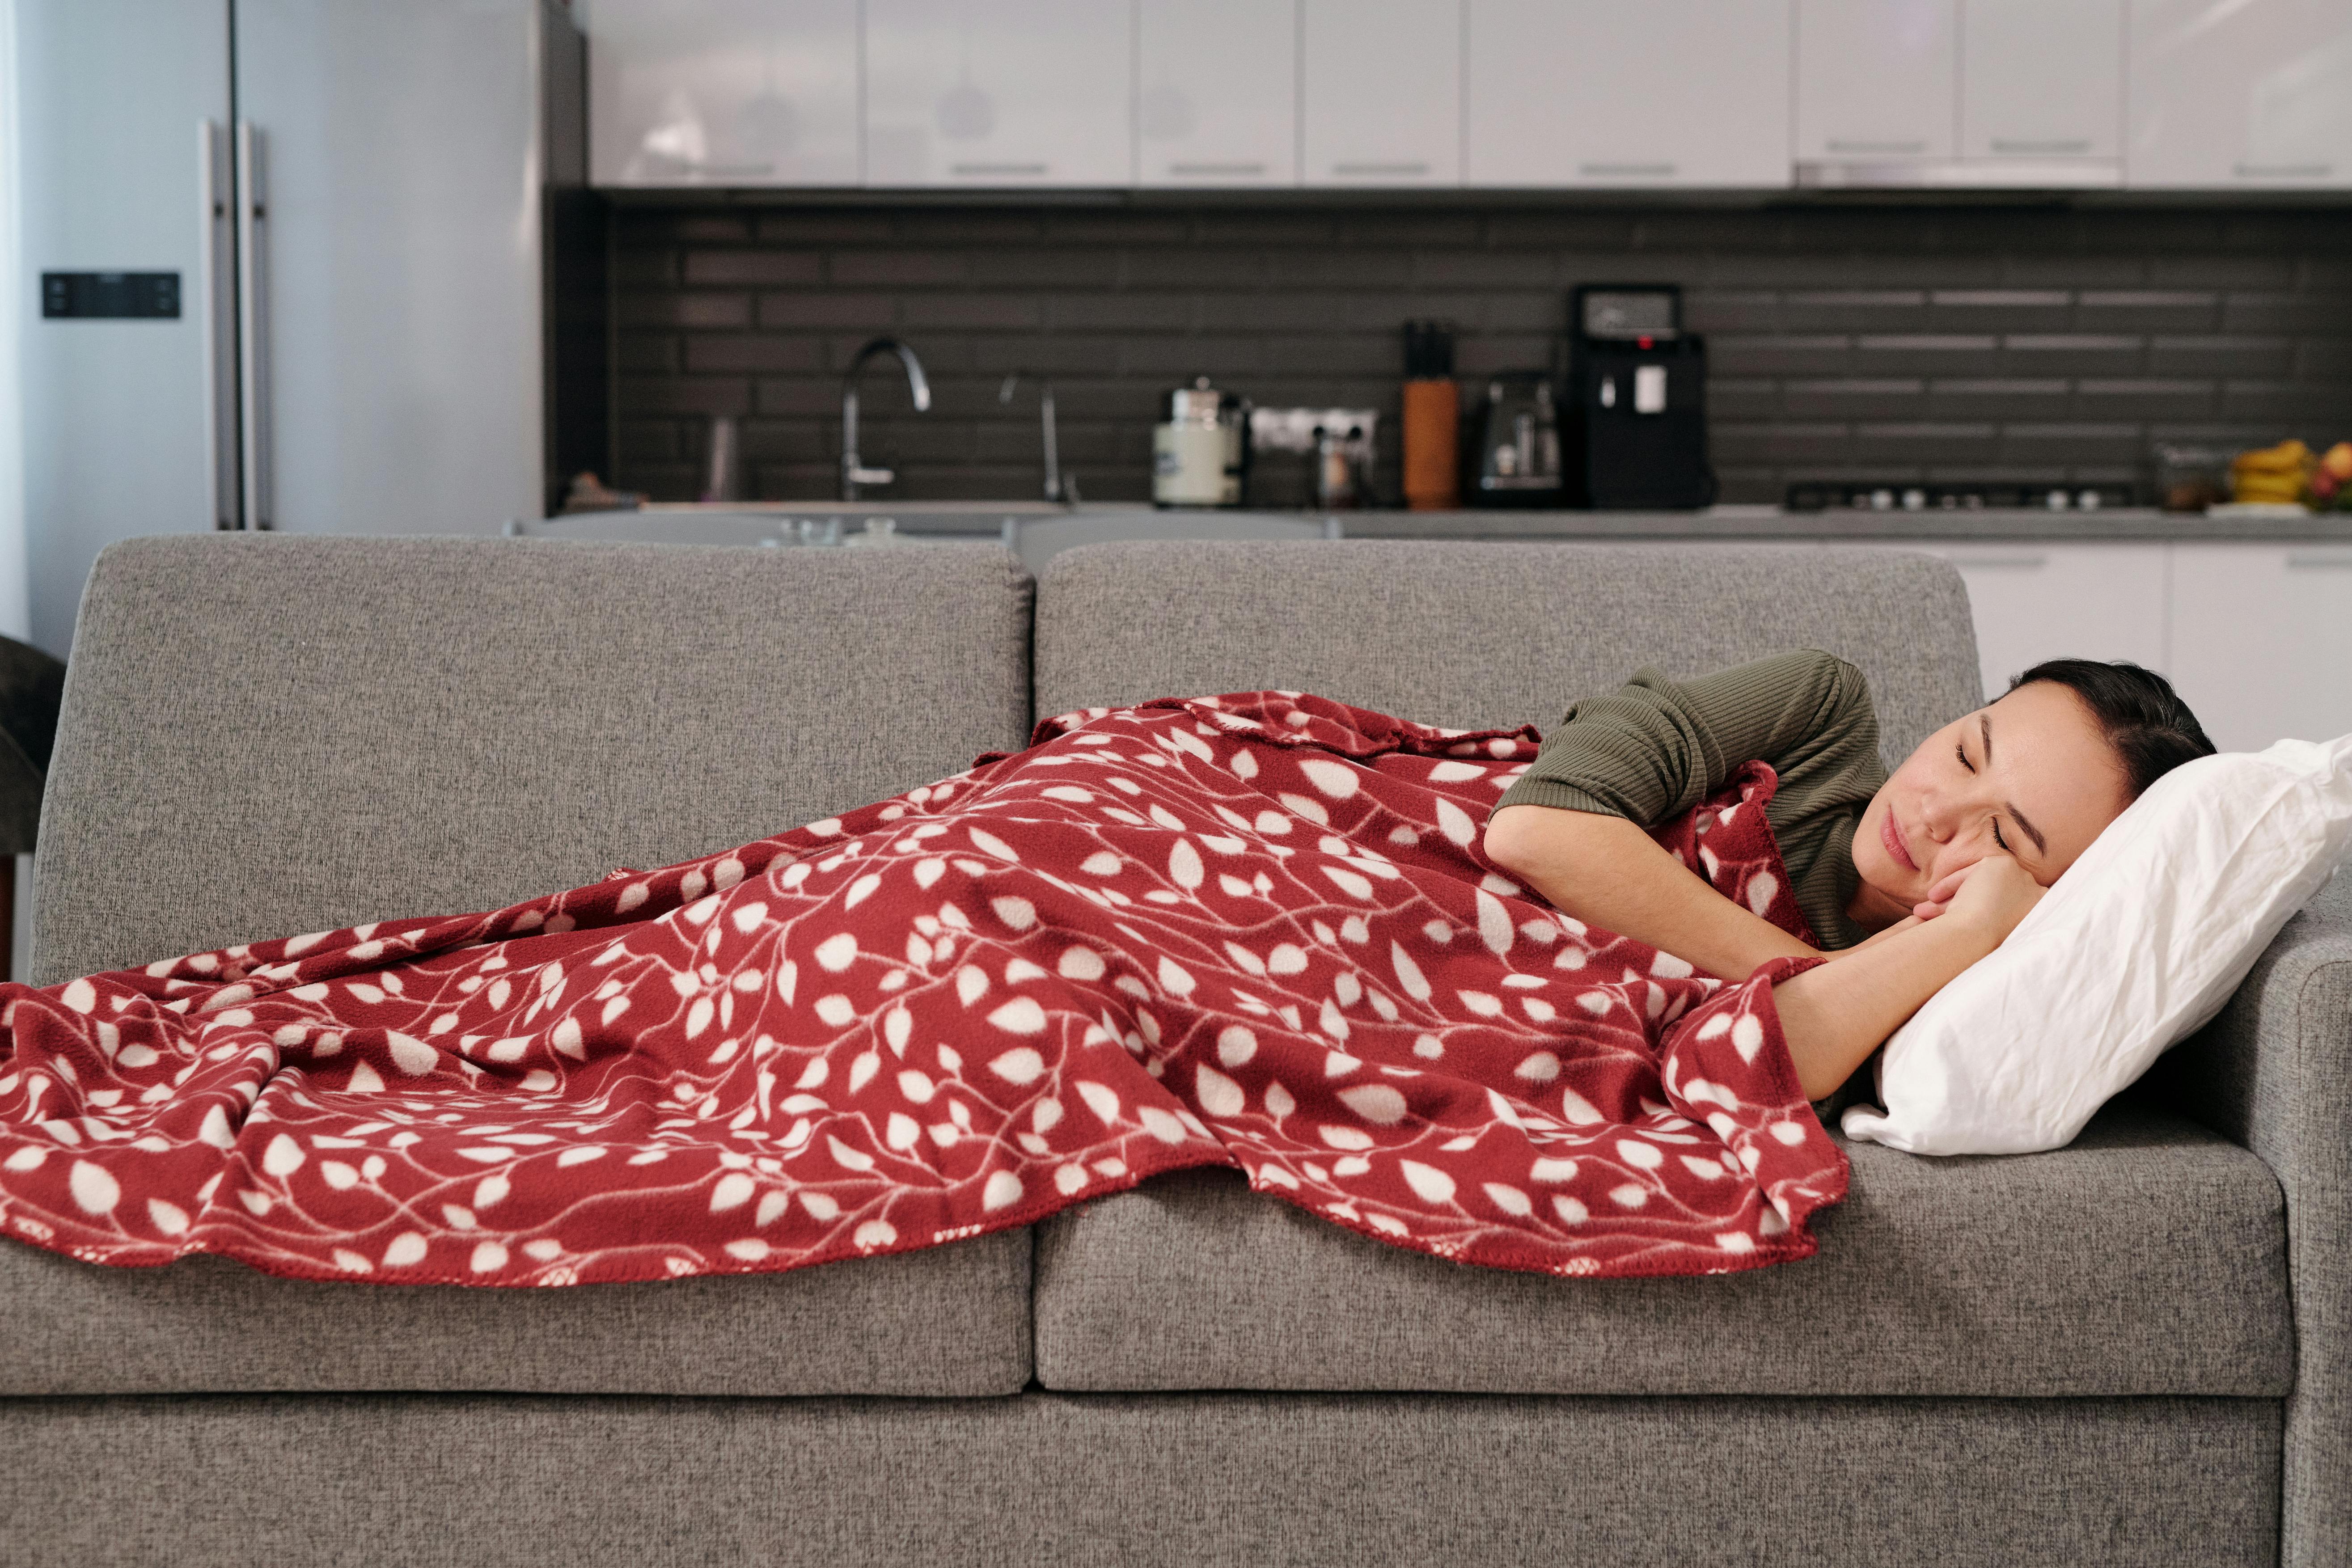 A woman sleeping on a couch | Source: Pexels